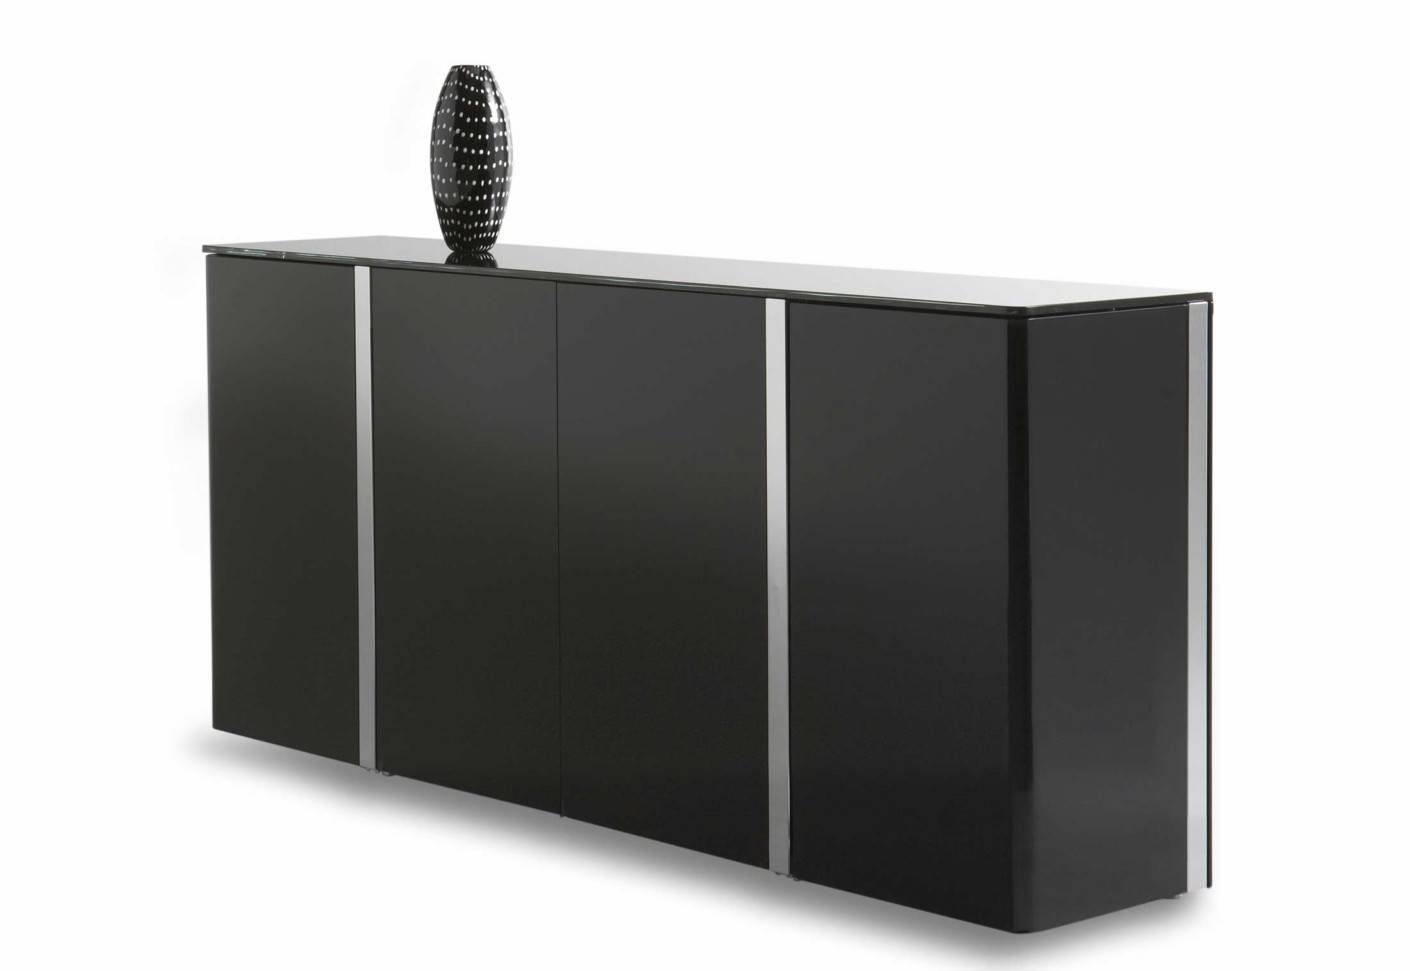 Sideboard Glass Cabinetfiam Italia | Stylepark With Glass Sideboard (View 18 of 20)